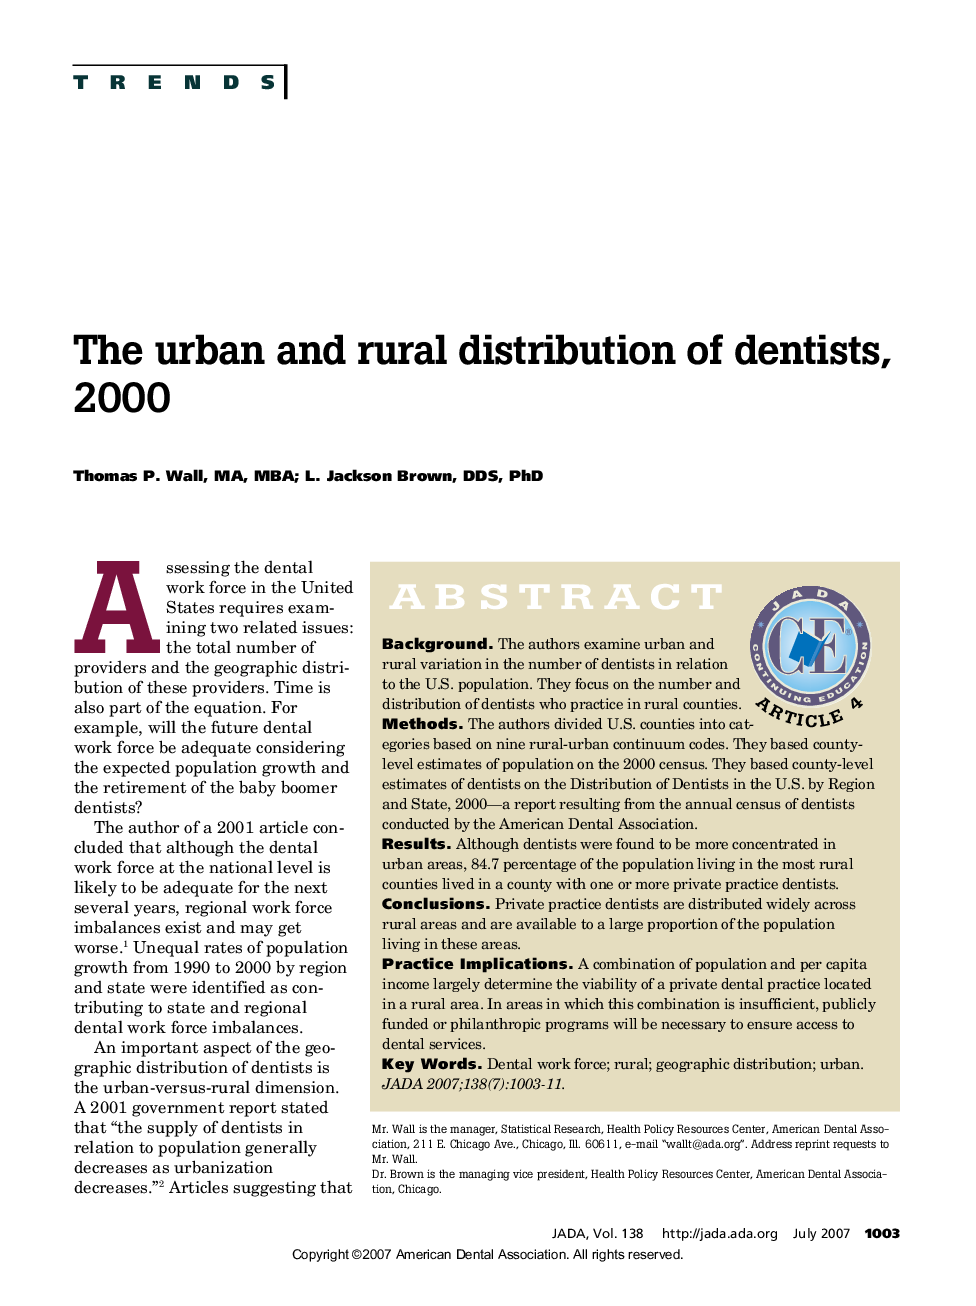 The urban and rural distribution of dentists, 2000